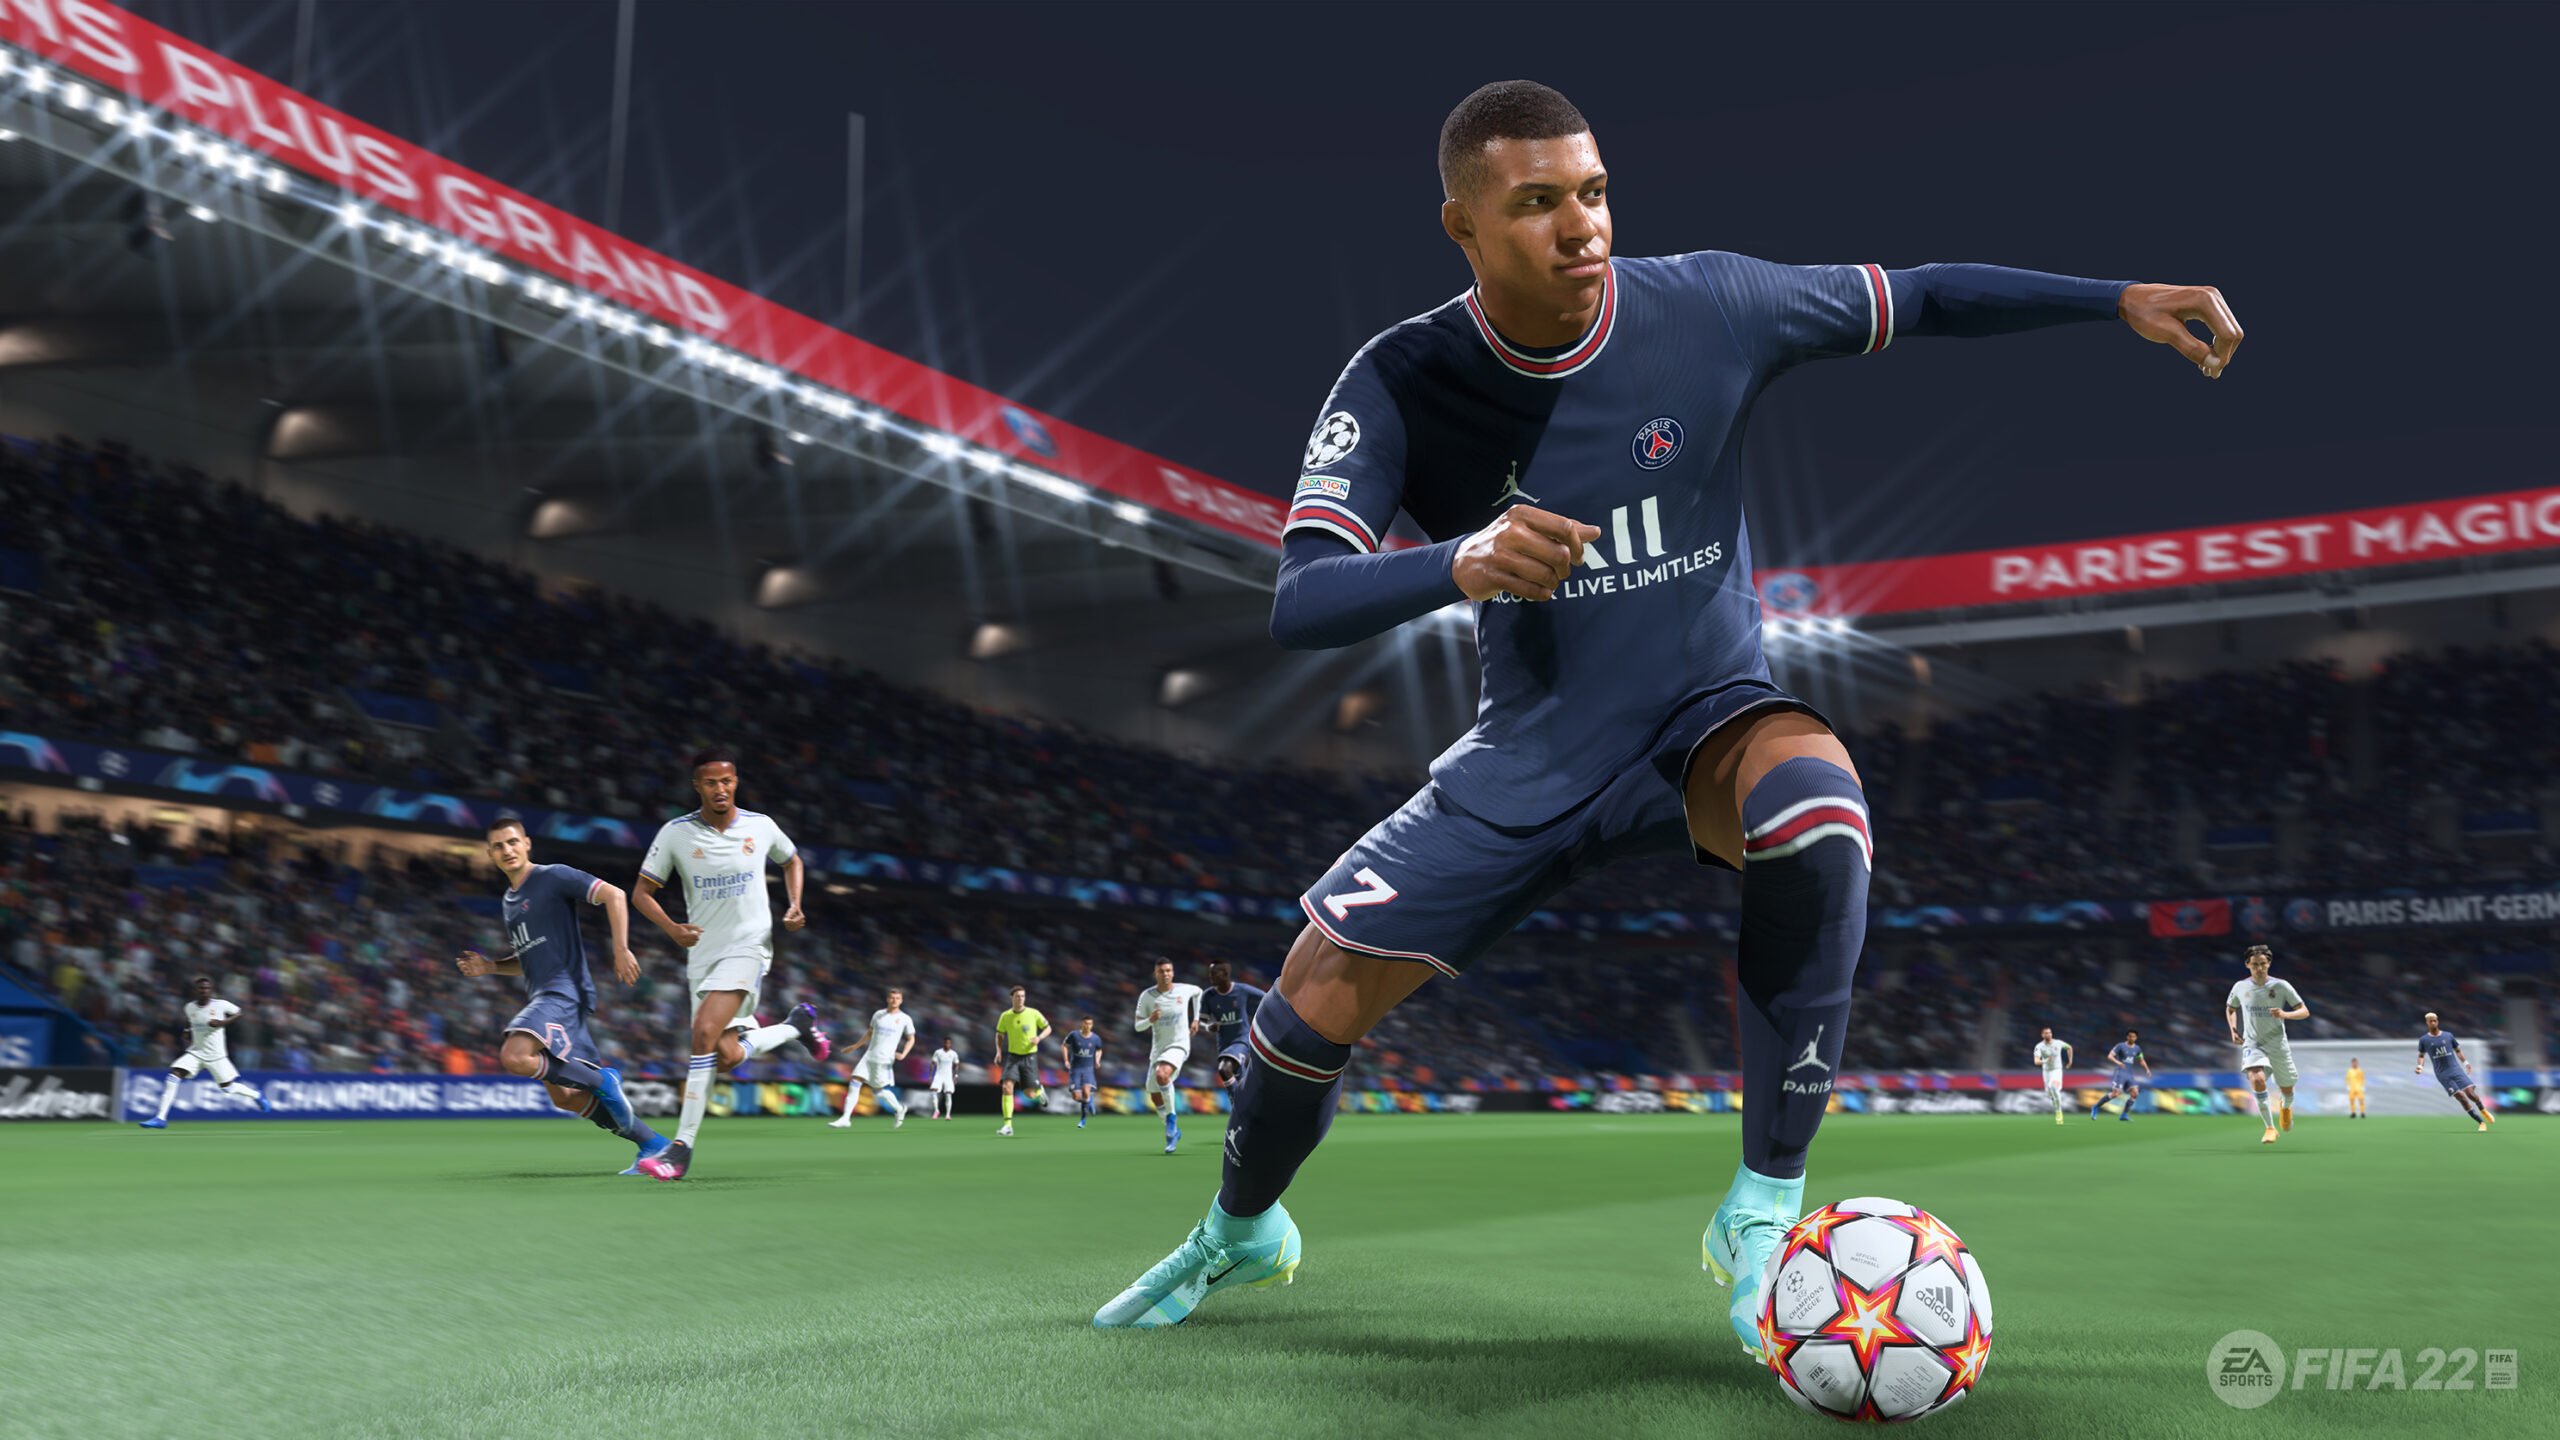 How to download the FIFA 23 10-hour trial on the Xbox Game Pass?